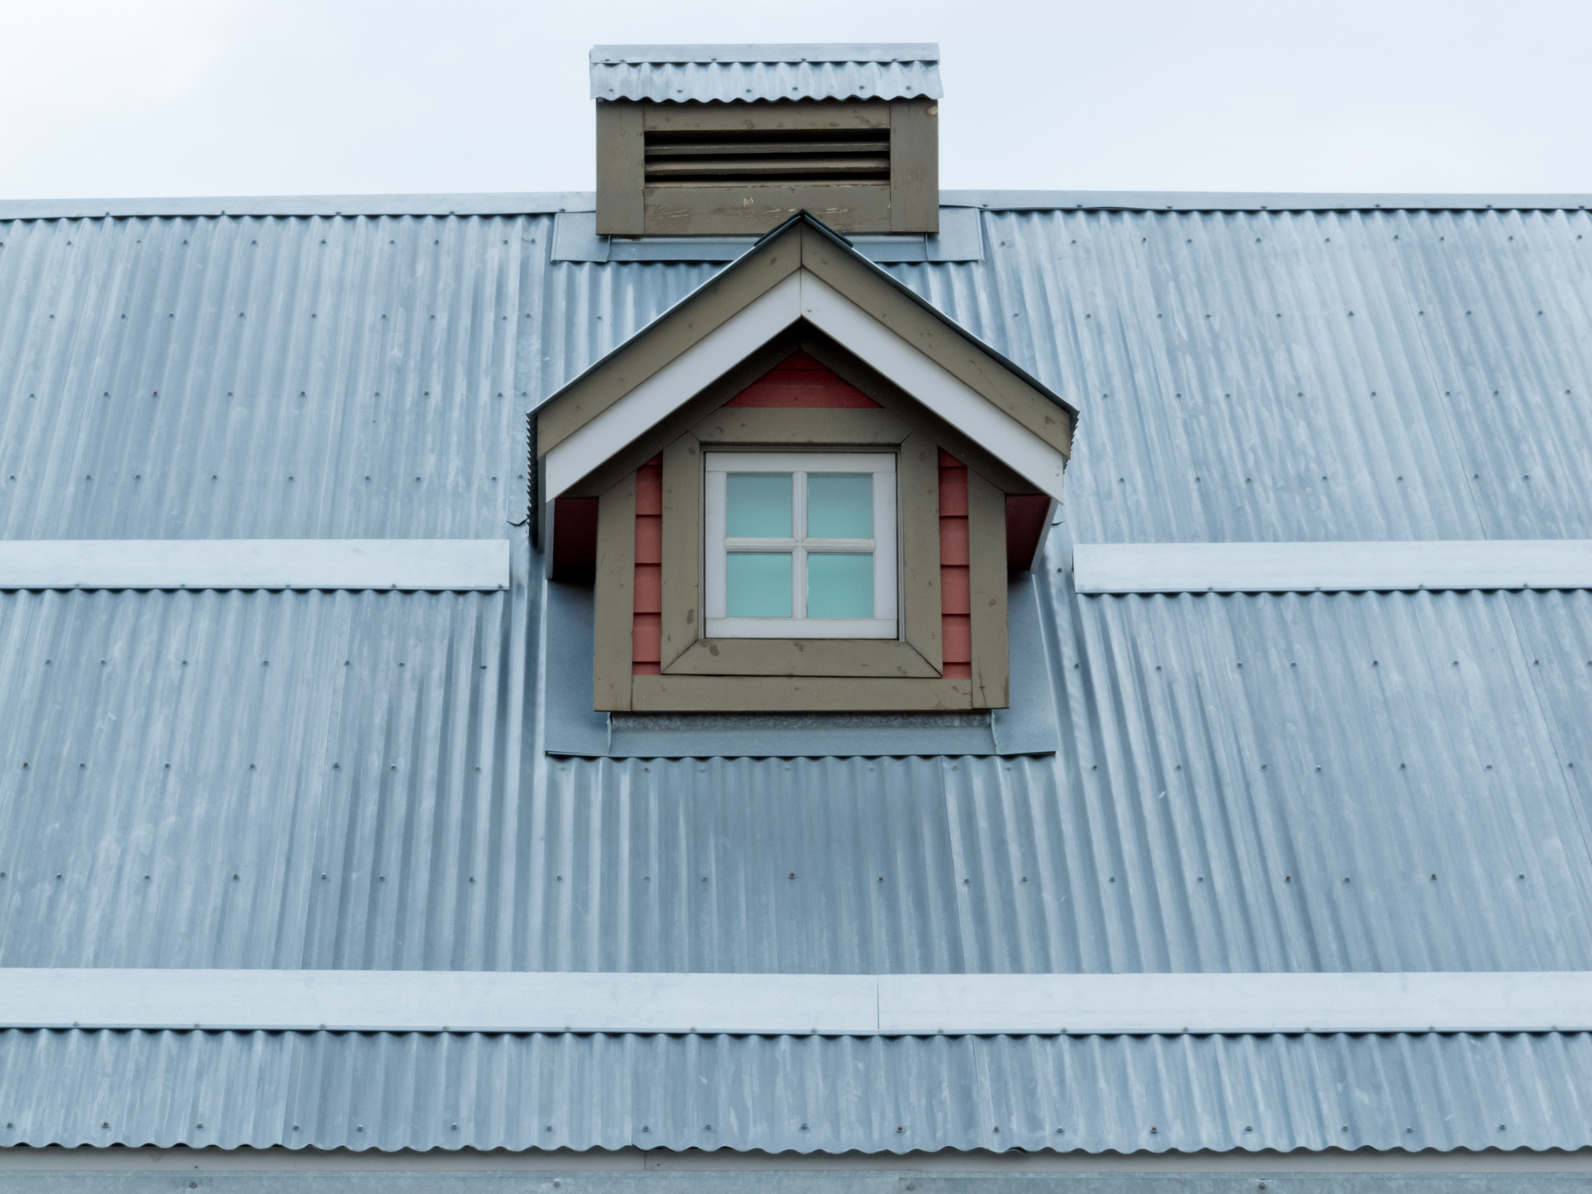 Why Kozy Kollar is Your Best Option for Metal Roof Flashing